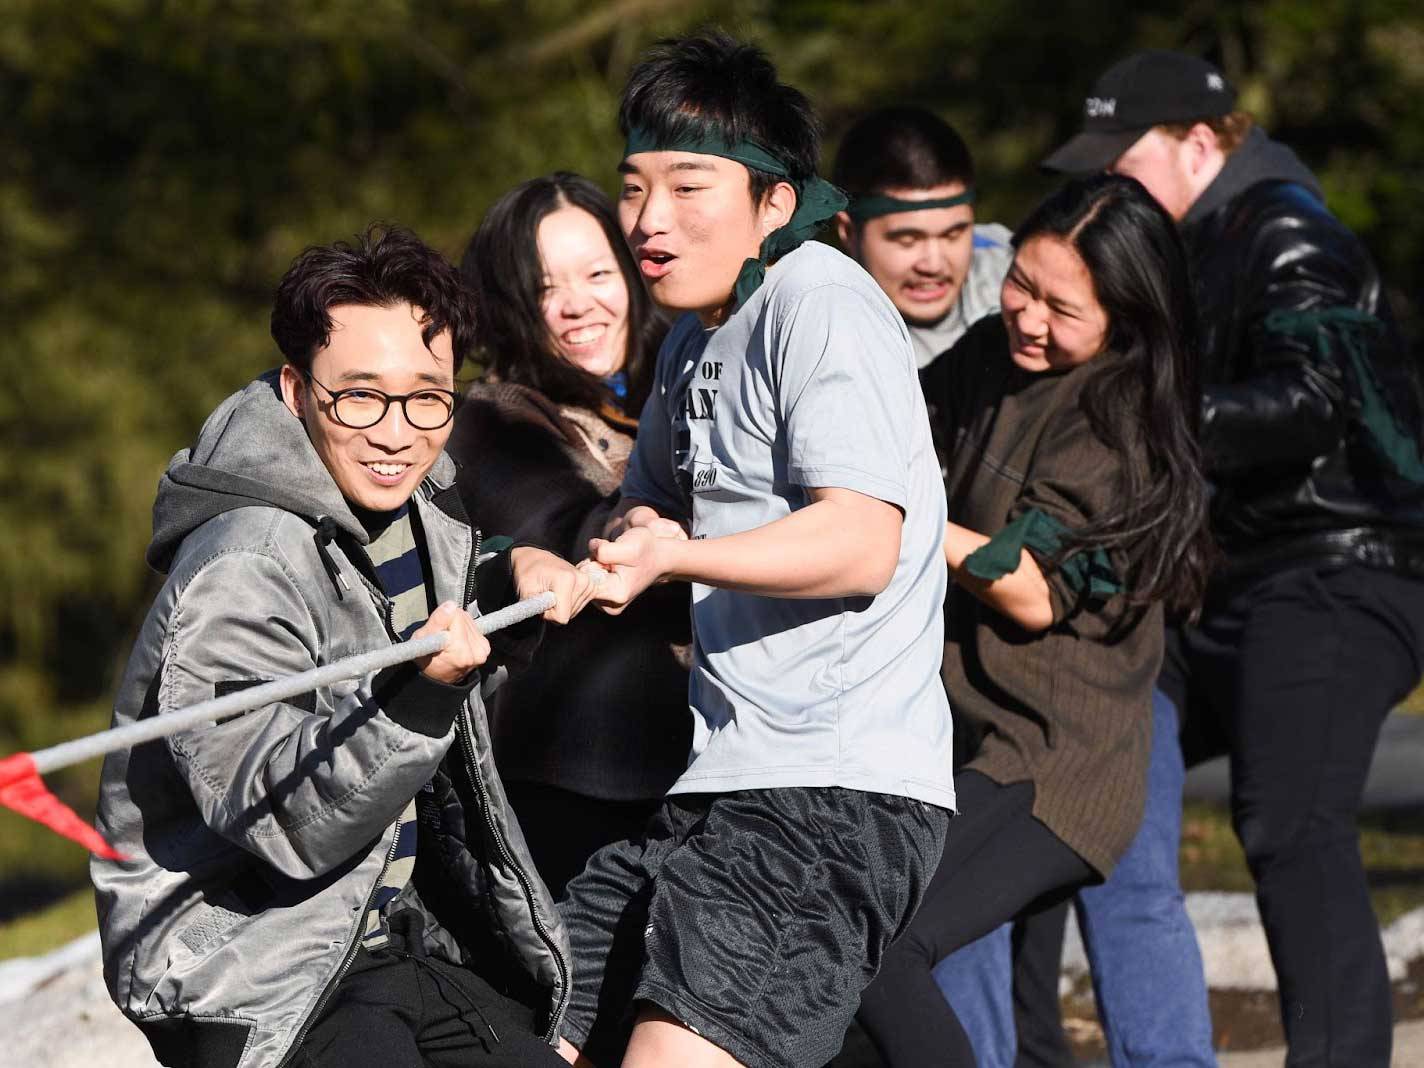 Green team competing in Undoukai championship game of tug-a-war